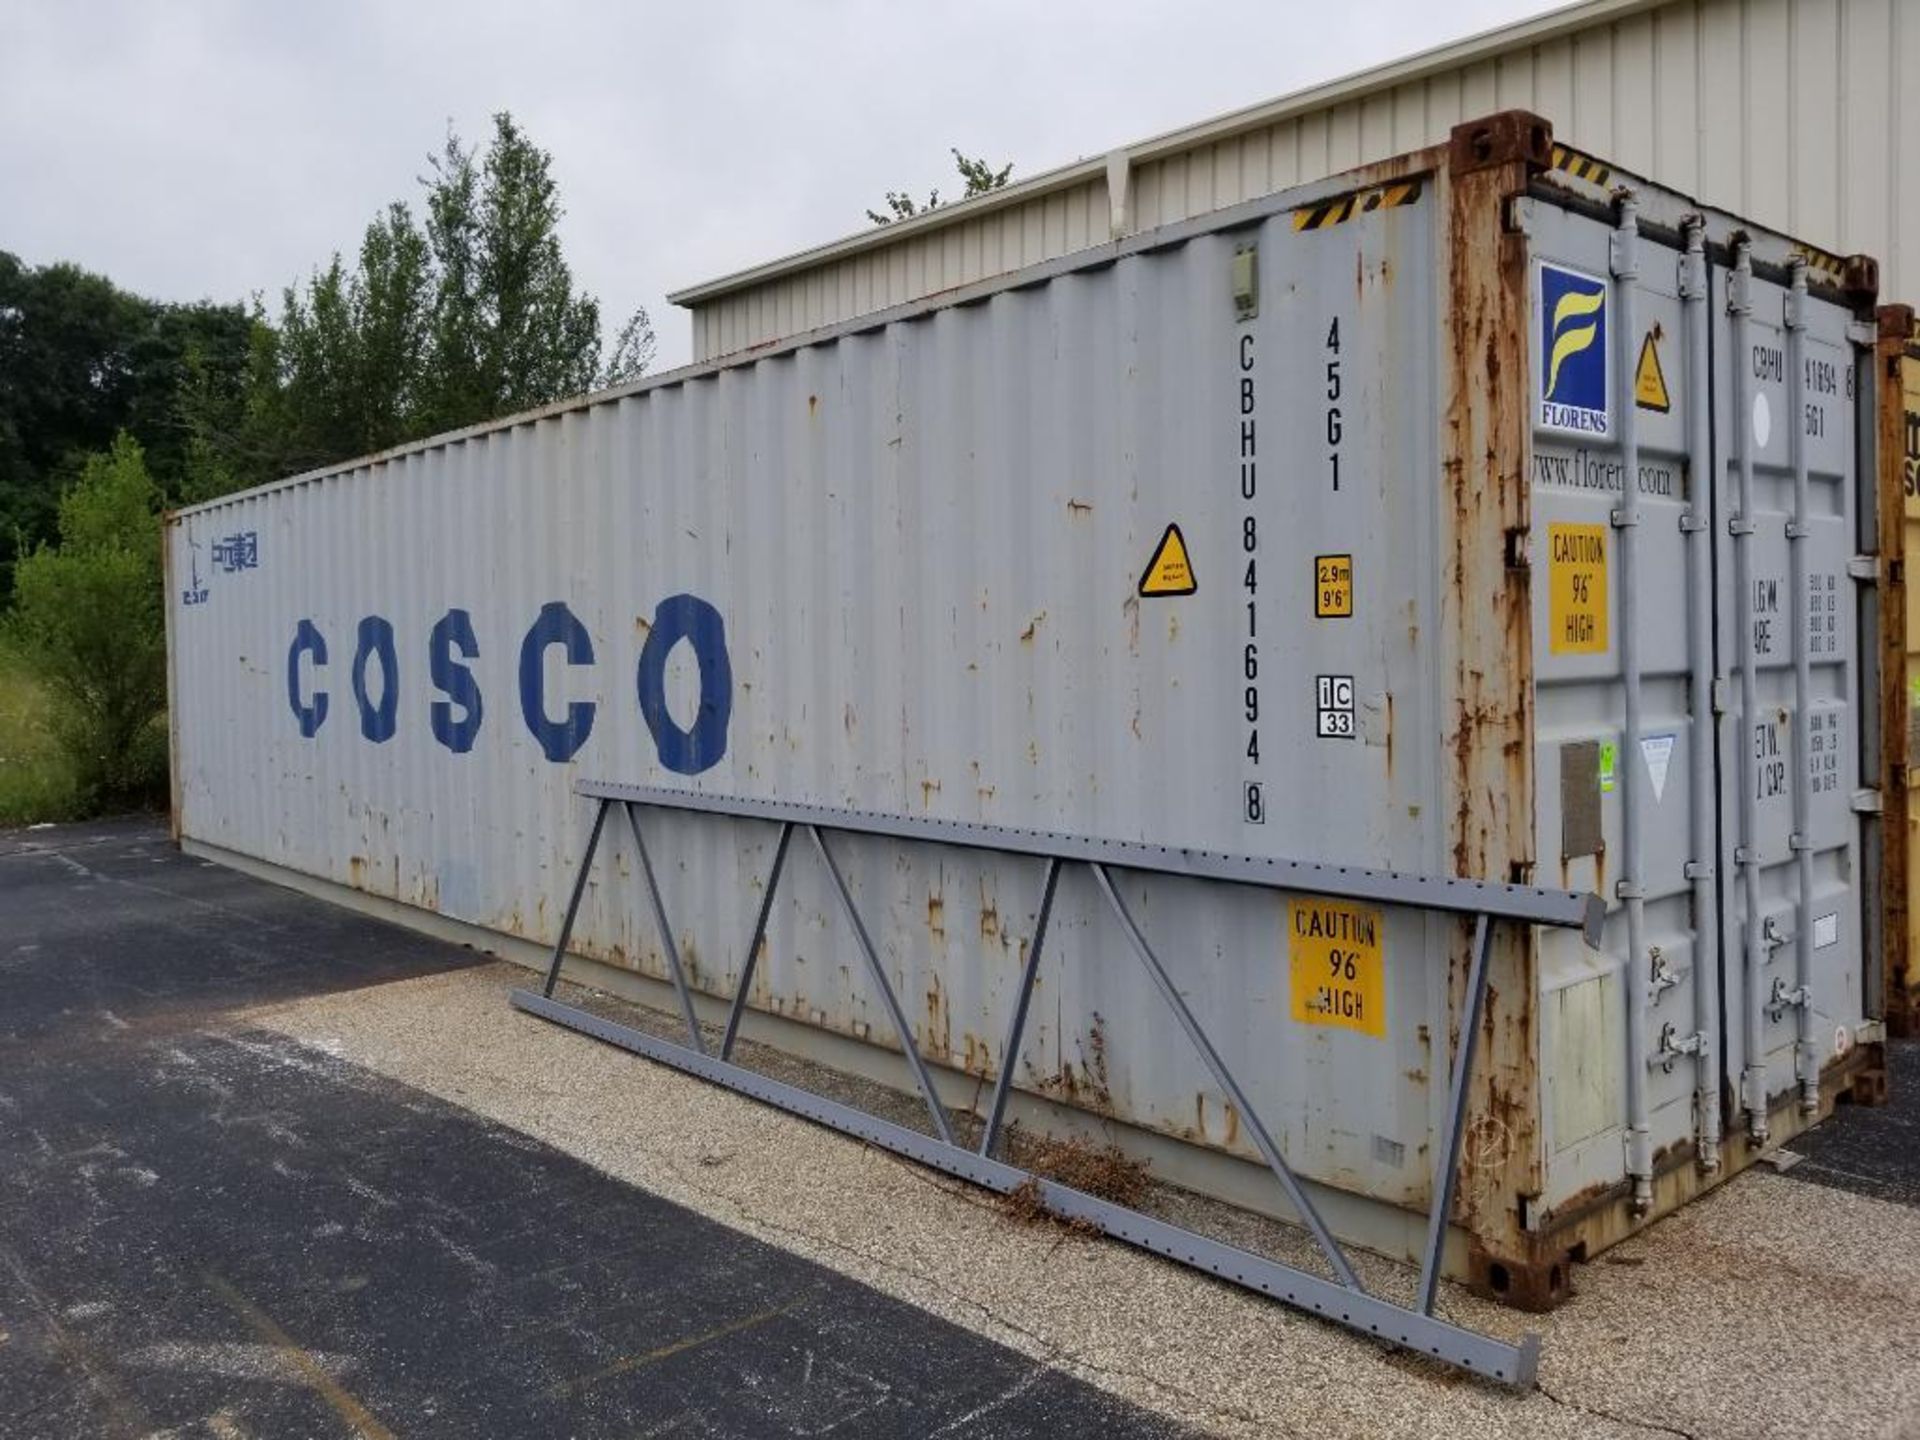 2006 Storage container. 40ft length. Type CX02-41FLR. ID# CBHU841694B. Max gross weight 71,650lbs. - Image 4 of 9